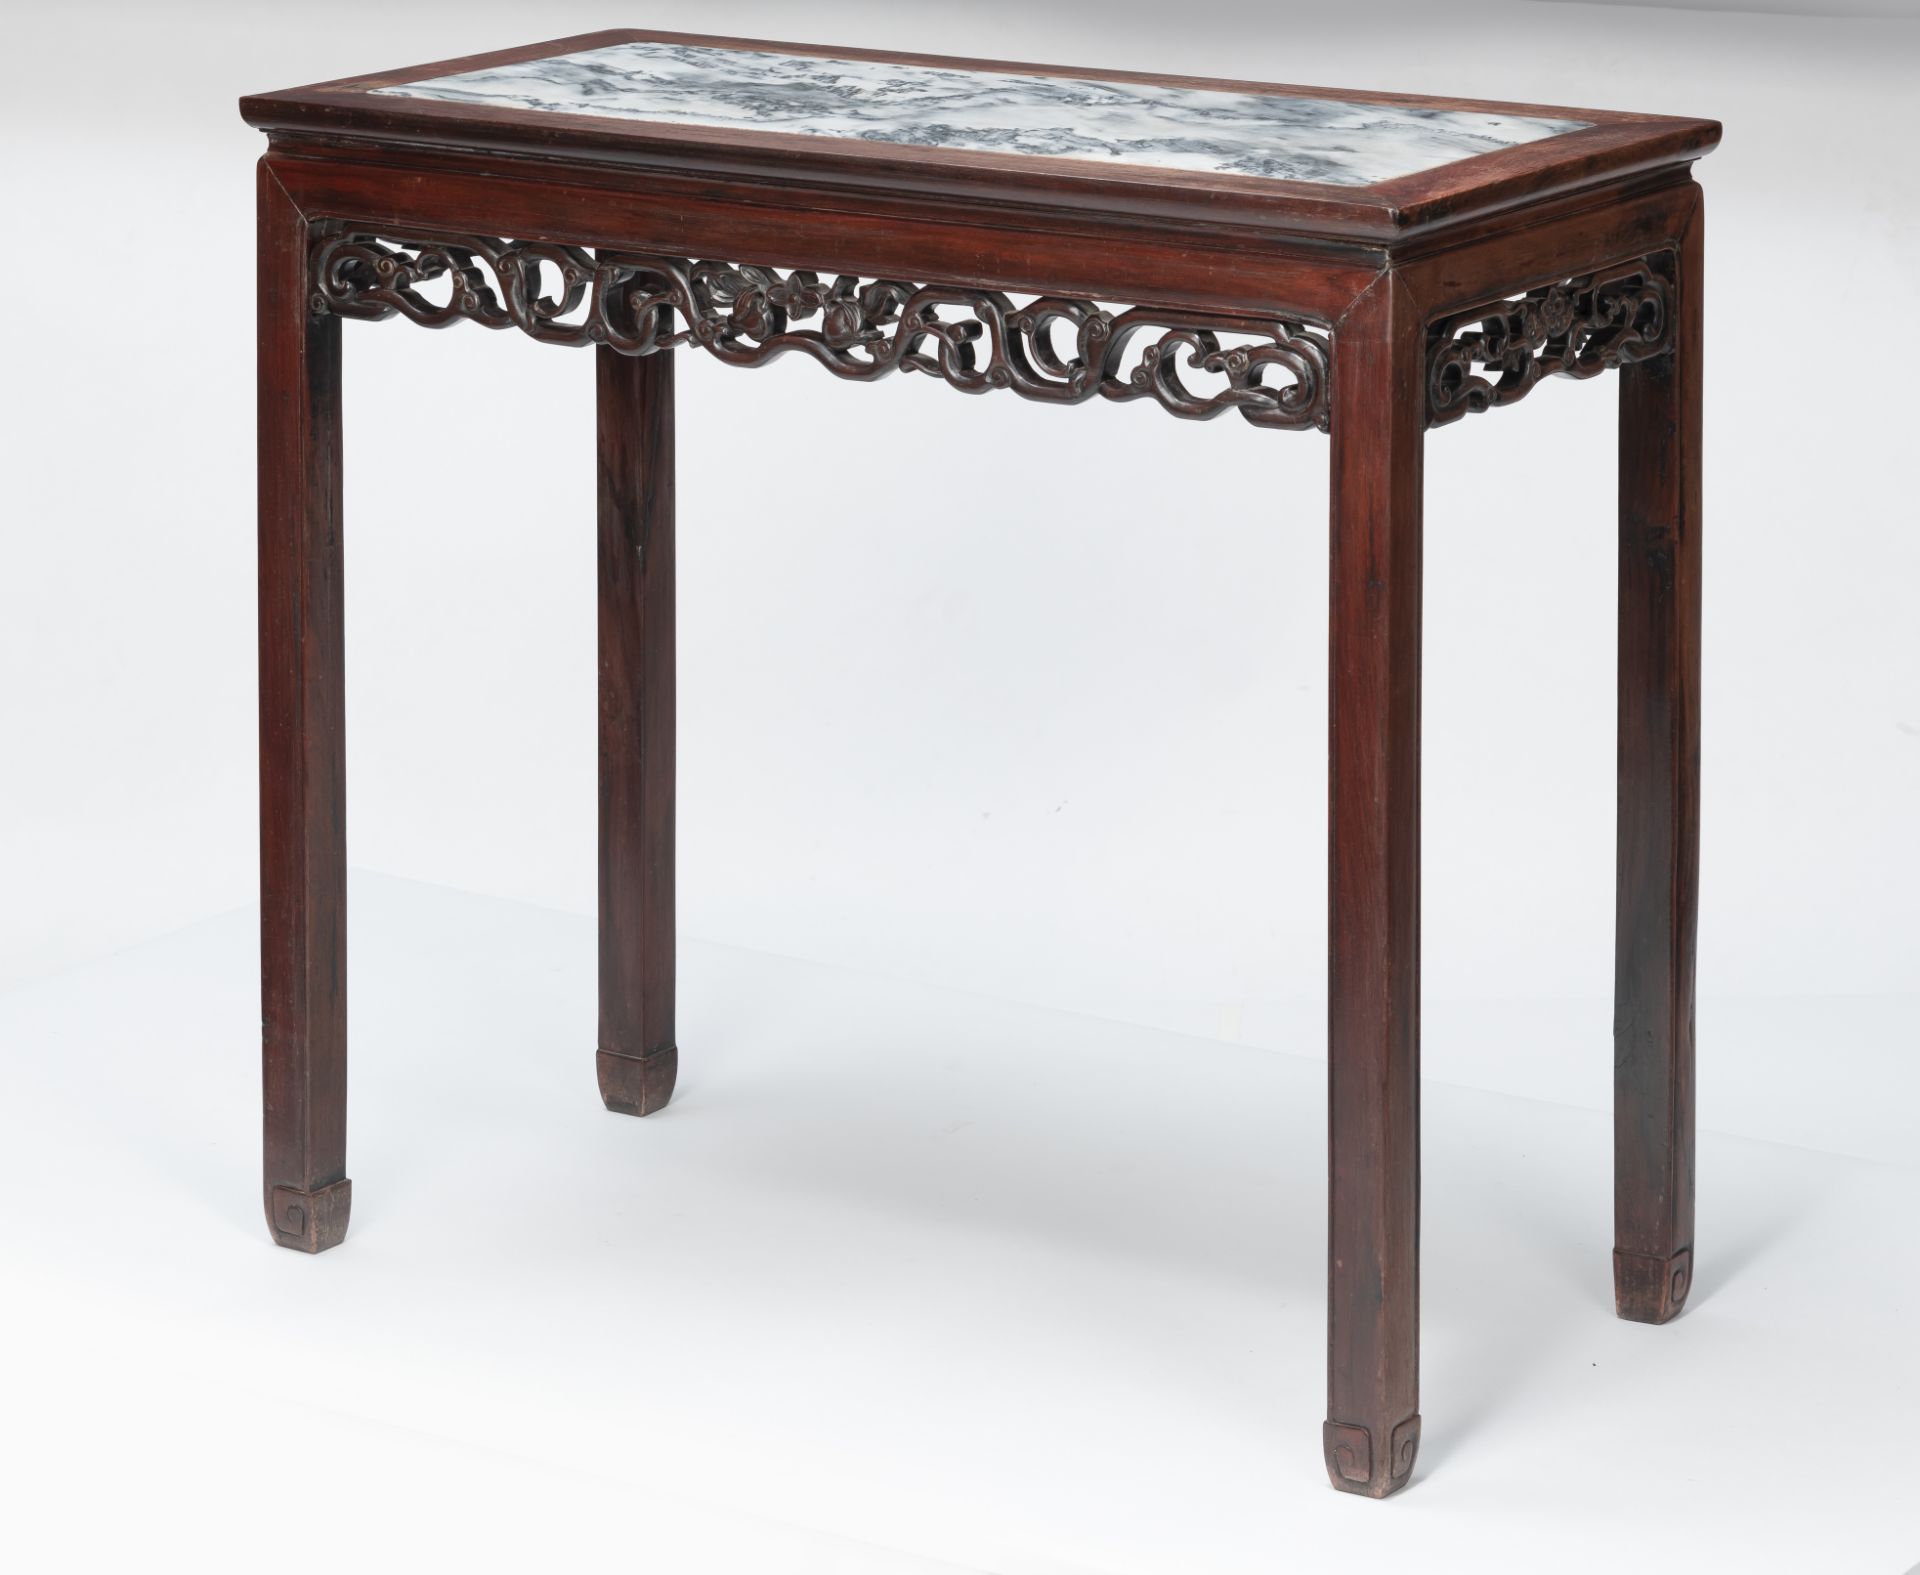 A MARBLE-INSET OPENWORK FLORAL SCROLL APRON CORNER-LEG TABLE - Image 4 of 5